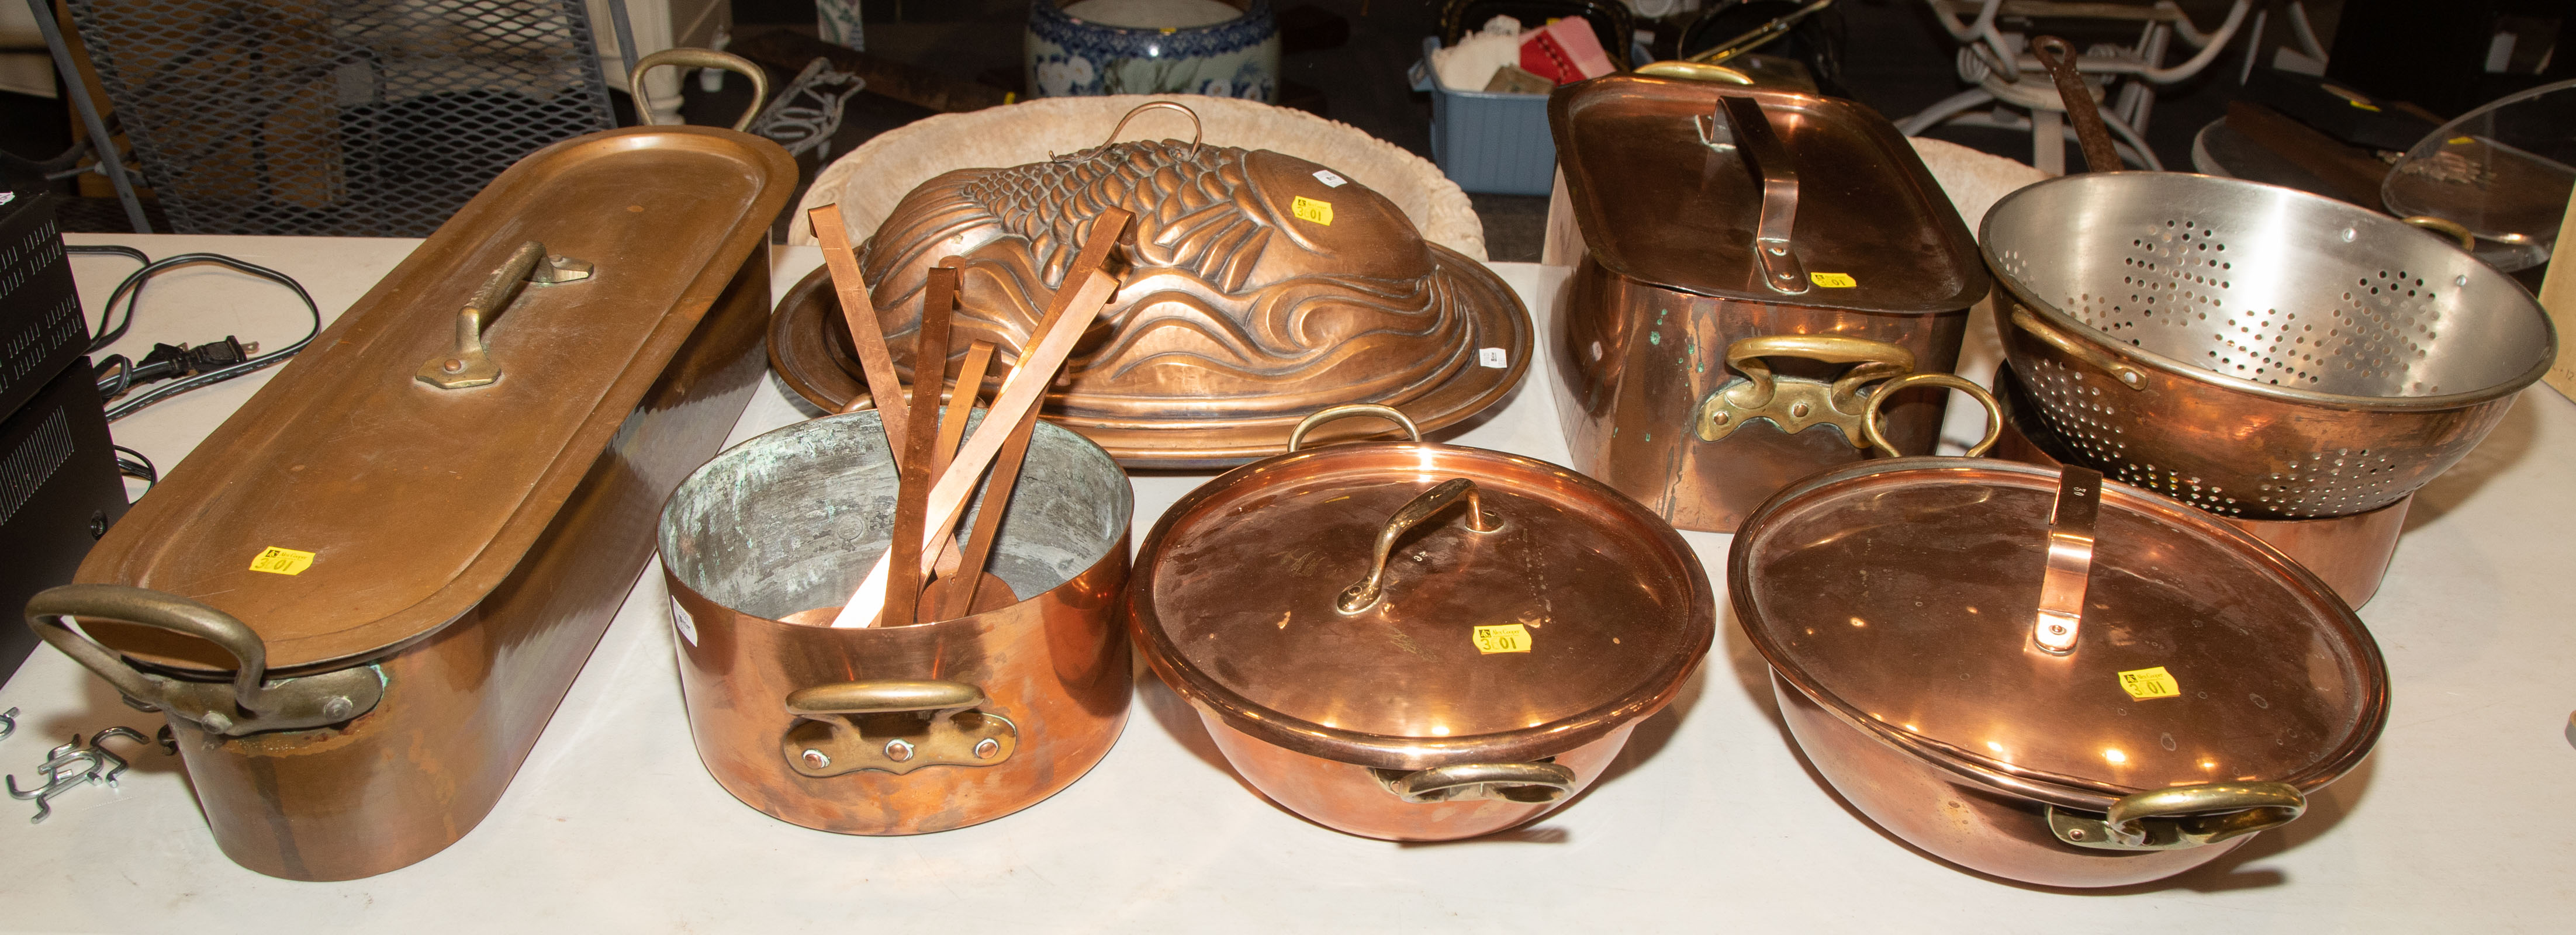 ASSORTMENT OF QUALITY COPPER COOKWARE 3356b6